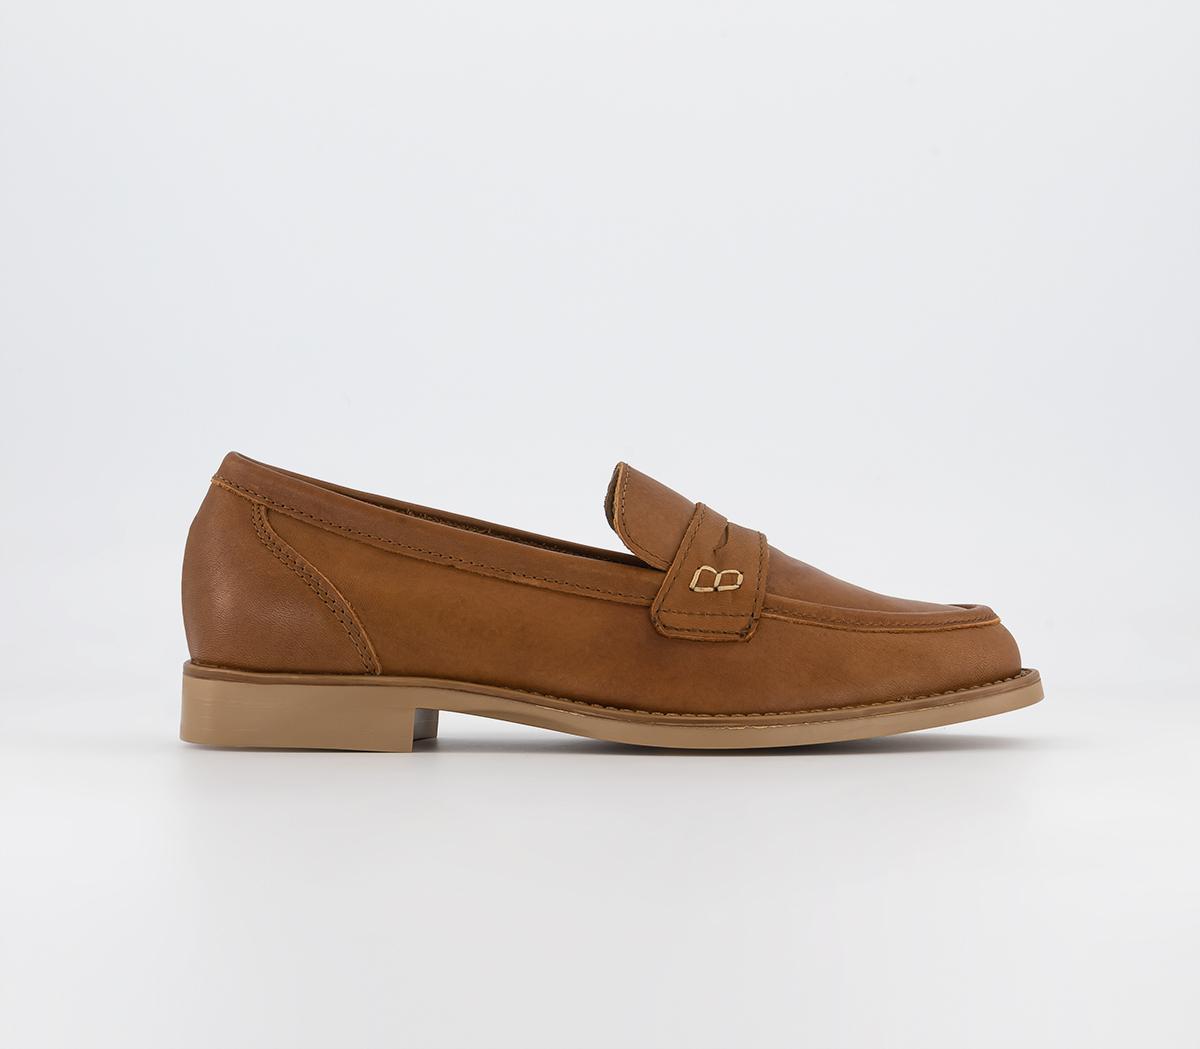 OFFICEFirst Class Classic Penny LoafersTan Leather